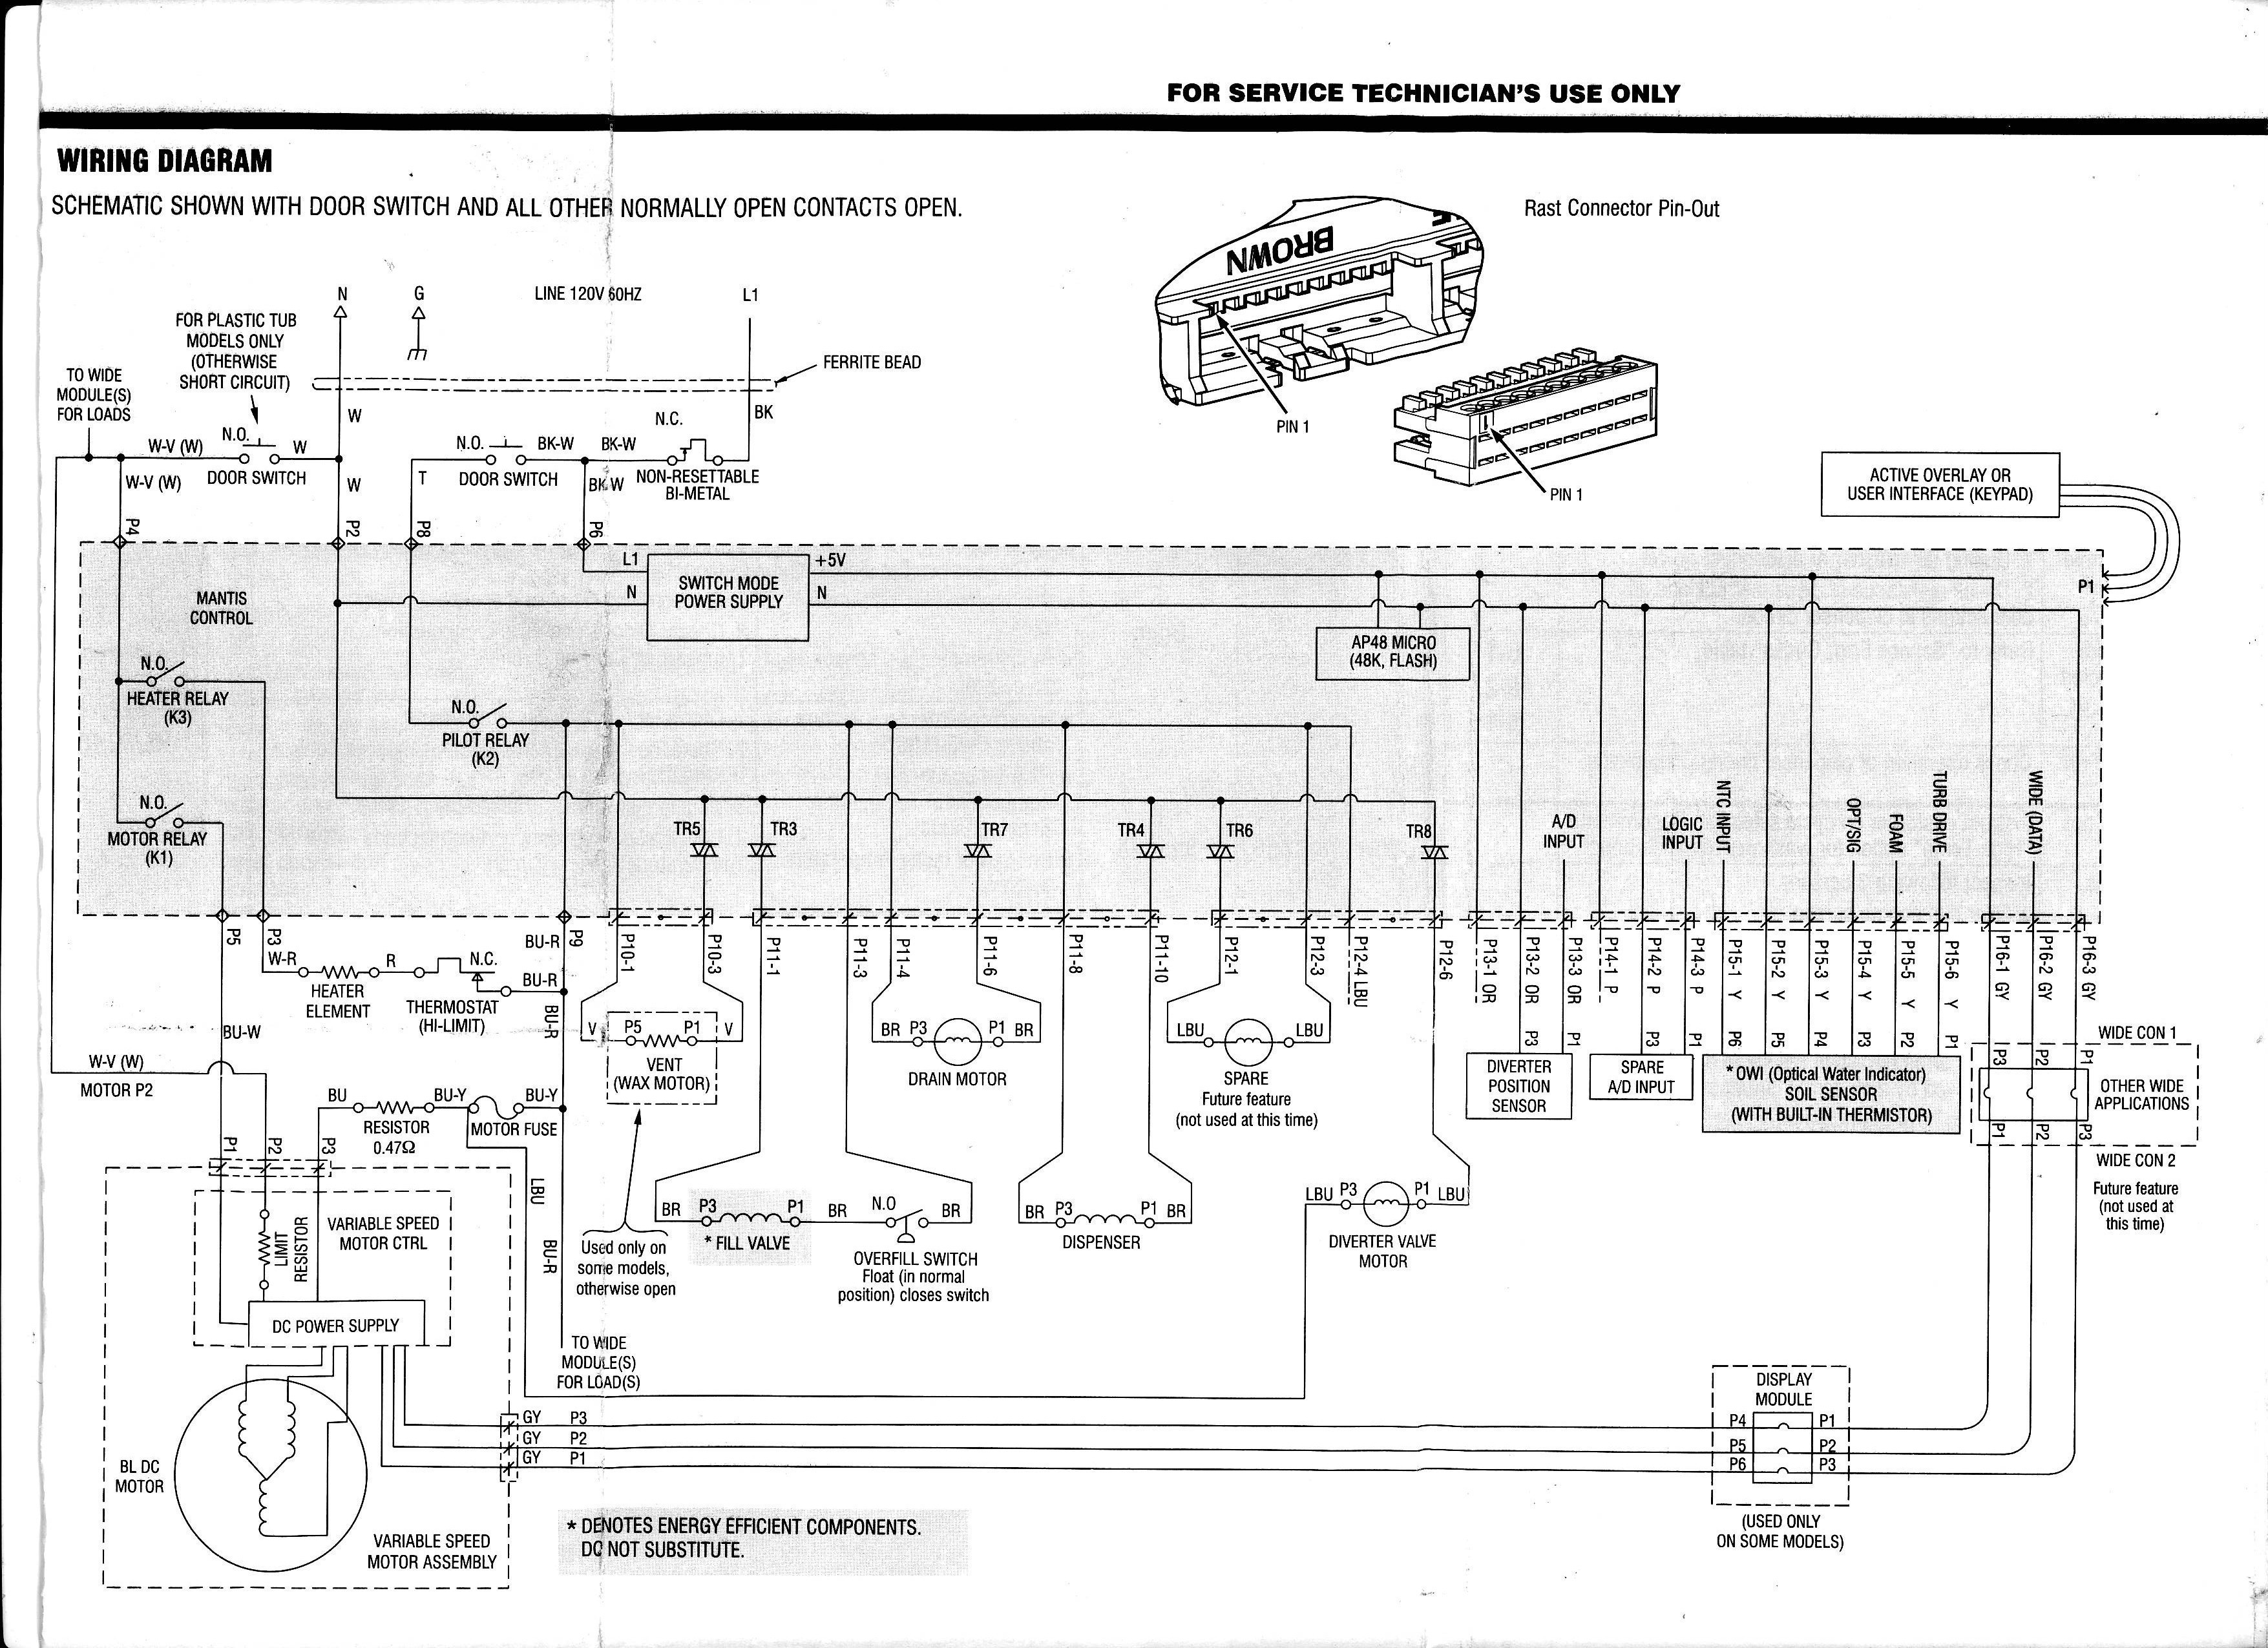 Wiring Diagram for Whirlpool Dryer Oven Wiring Diagram Sears Layout Wiring Diagrams • Of Wiring Diagram for Whirlpool Dryer